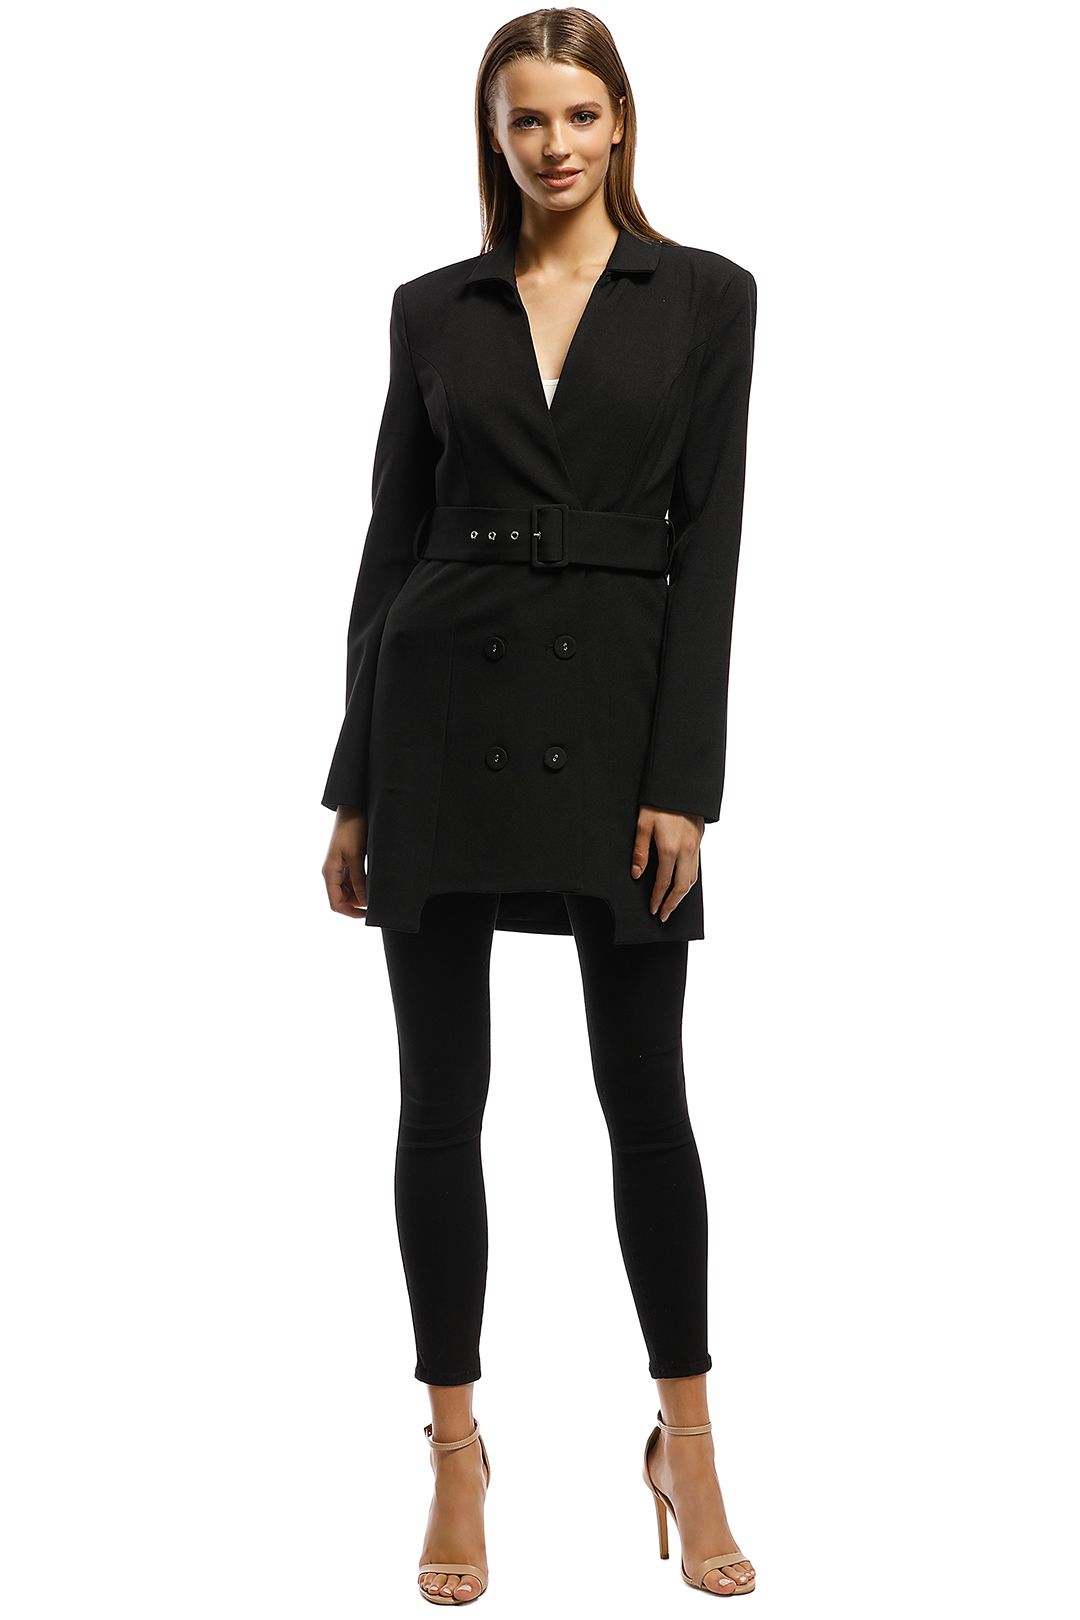 CMEO Collective - Mode LS Dress - Black - Front